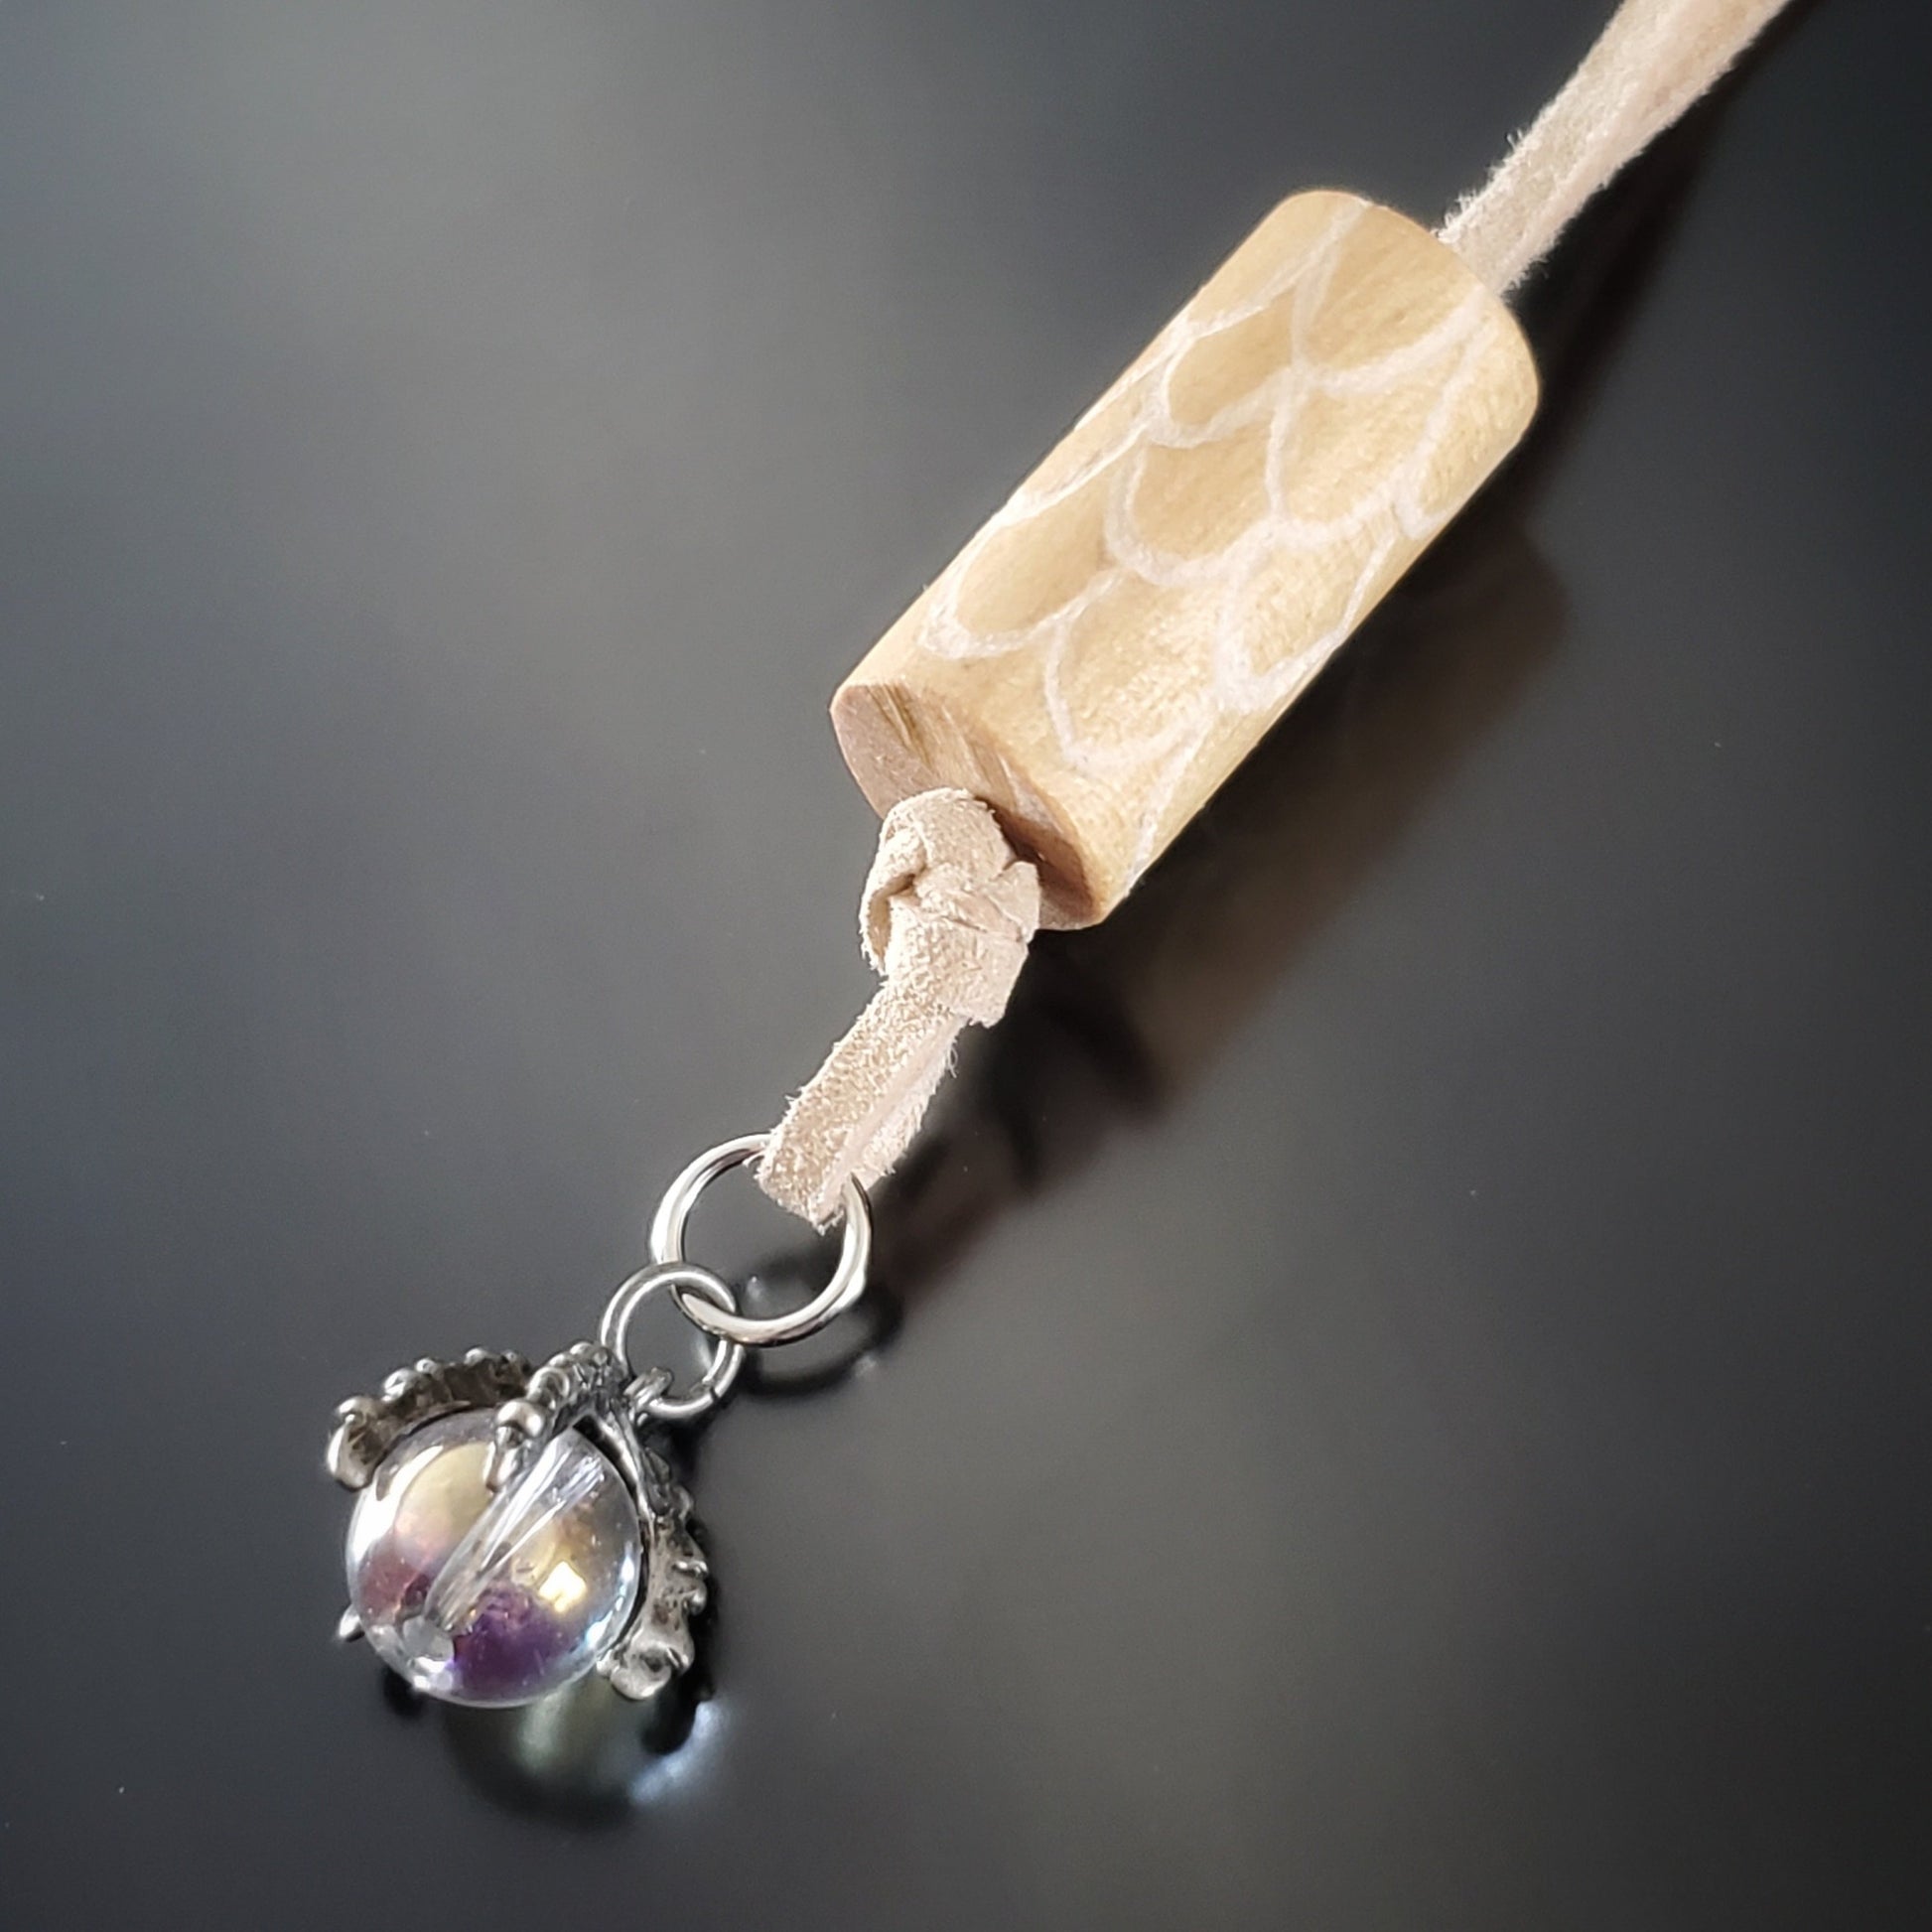 necklace made from a piece of upcycled drumstick on which dragon scales are etched under the drumstick a silver coloured dragon claw pendant holds a clear bead - a beige swede cord holds the pendant- black backgound